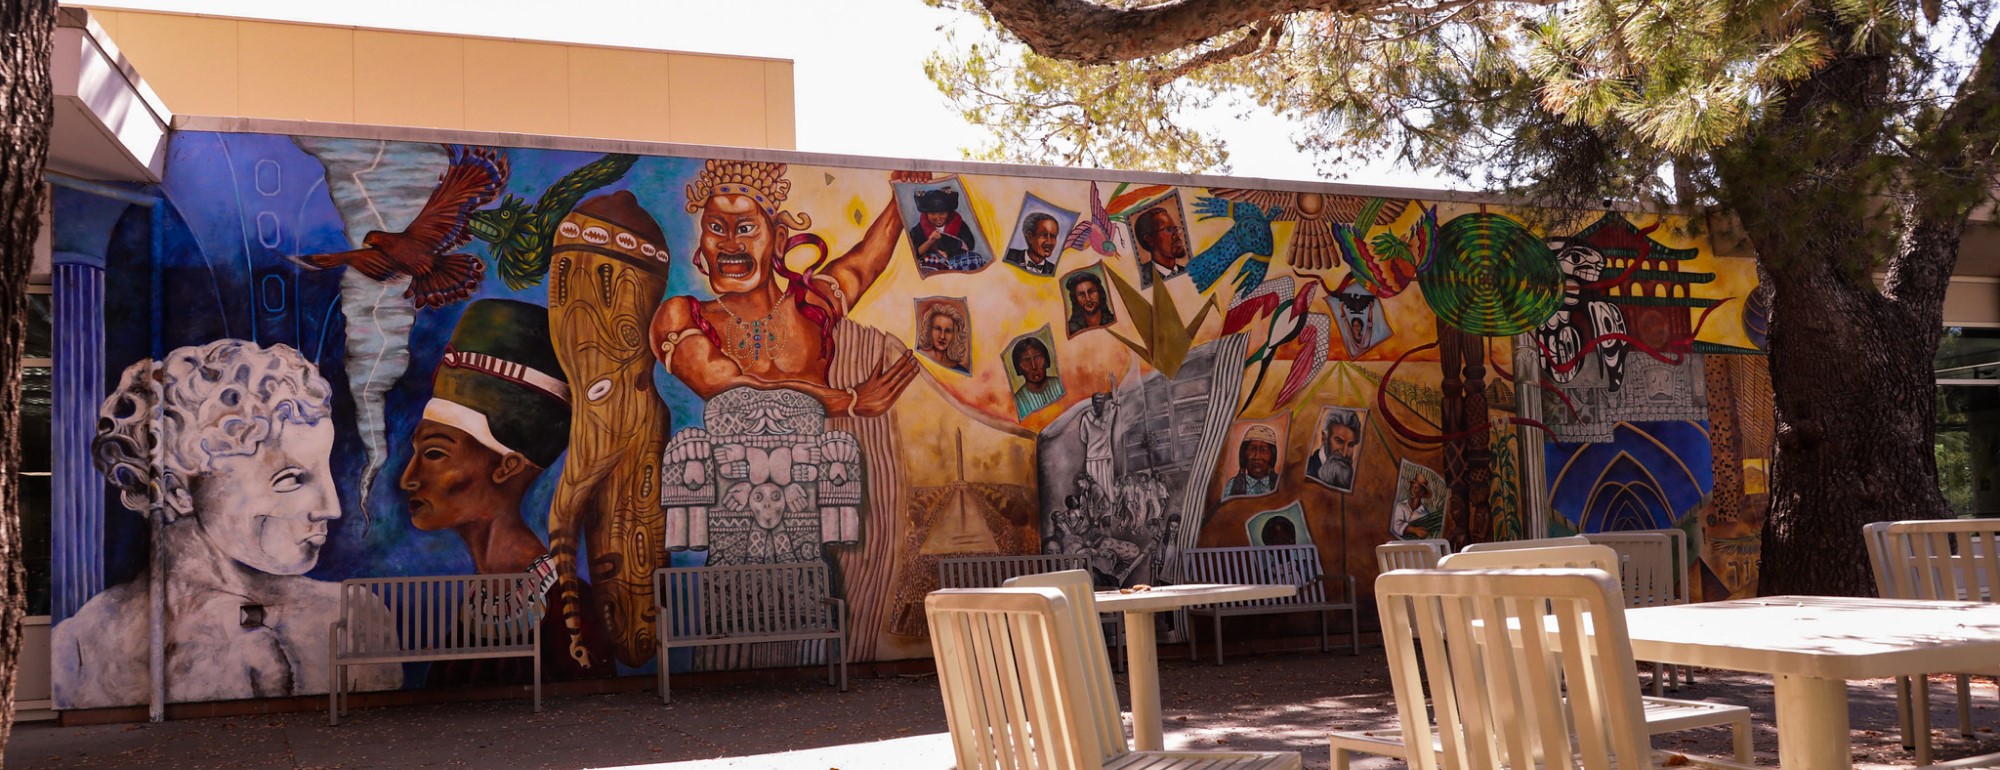 The Unfinished Dream Mural at the UC Davis Memorial Union